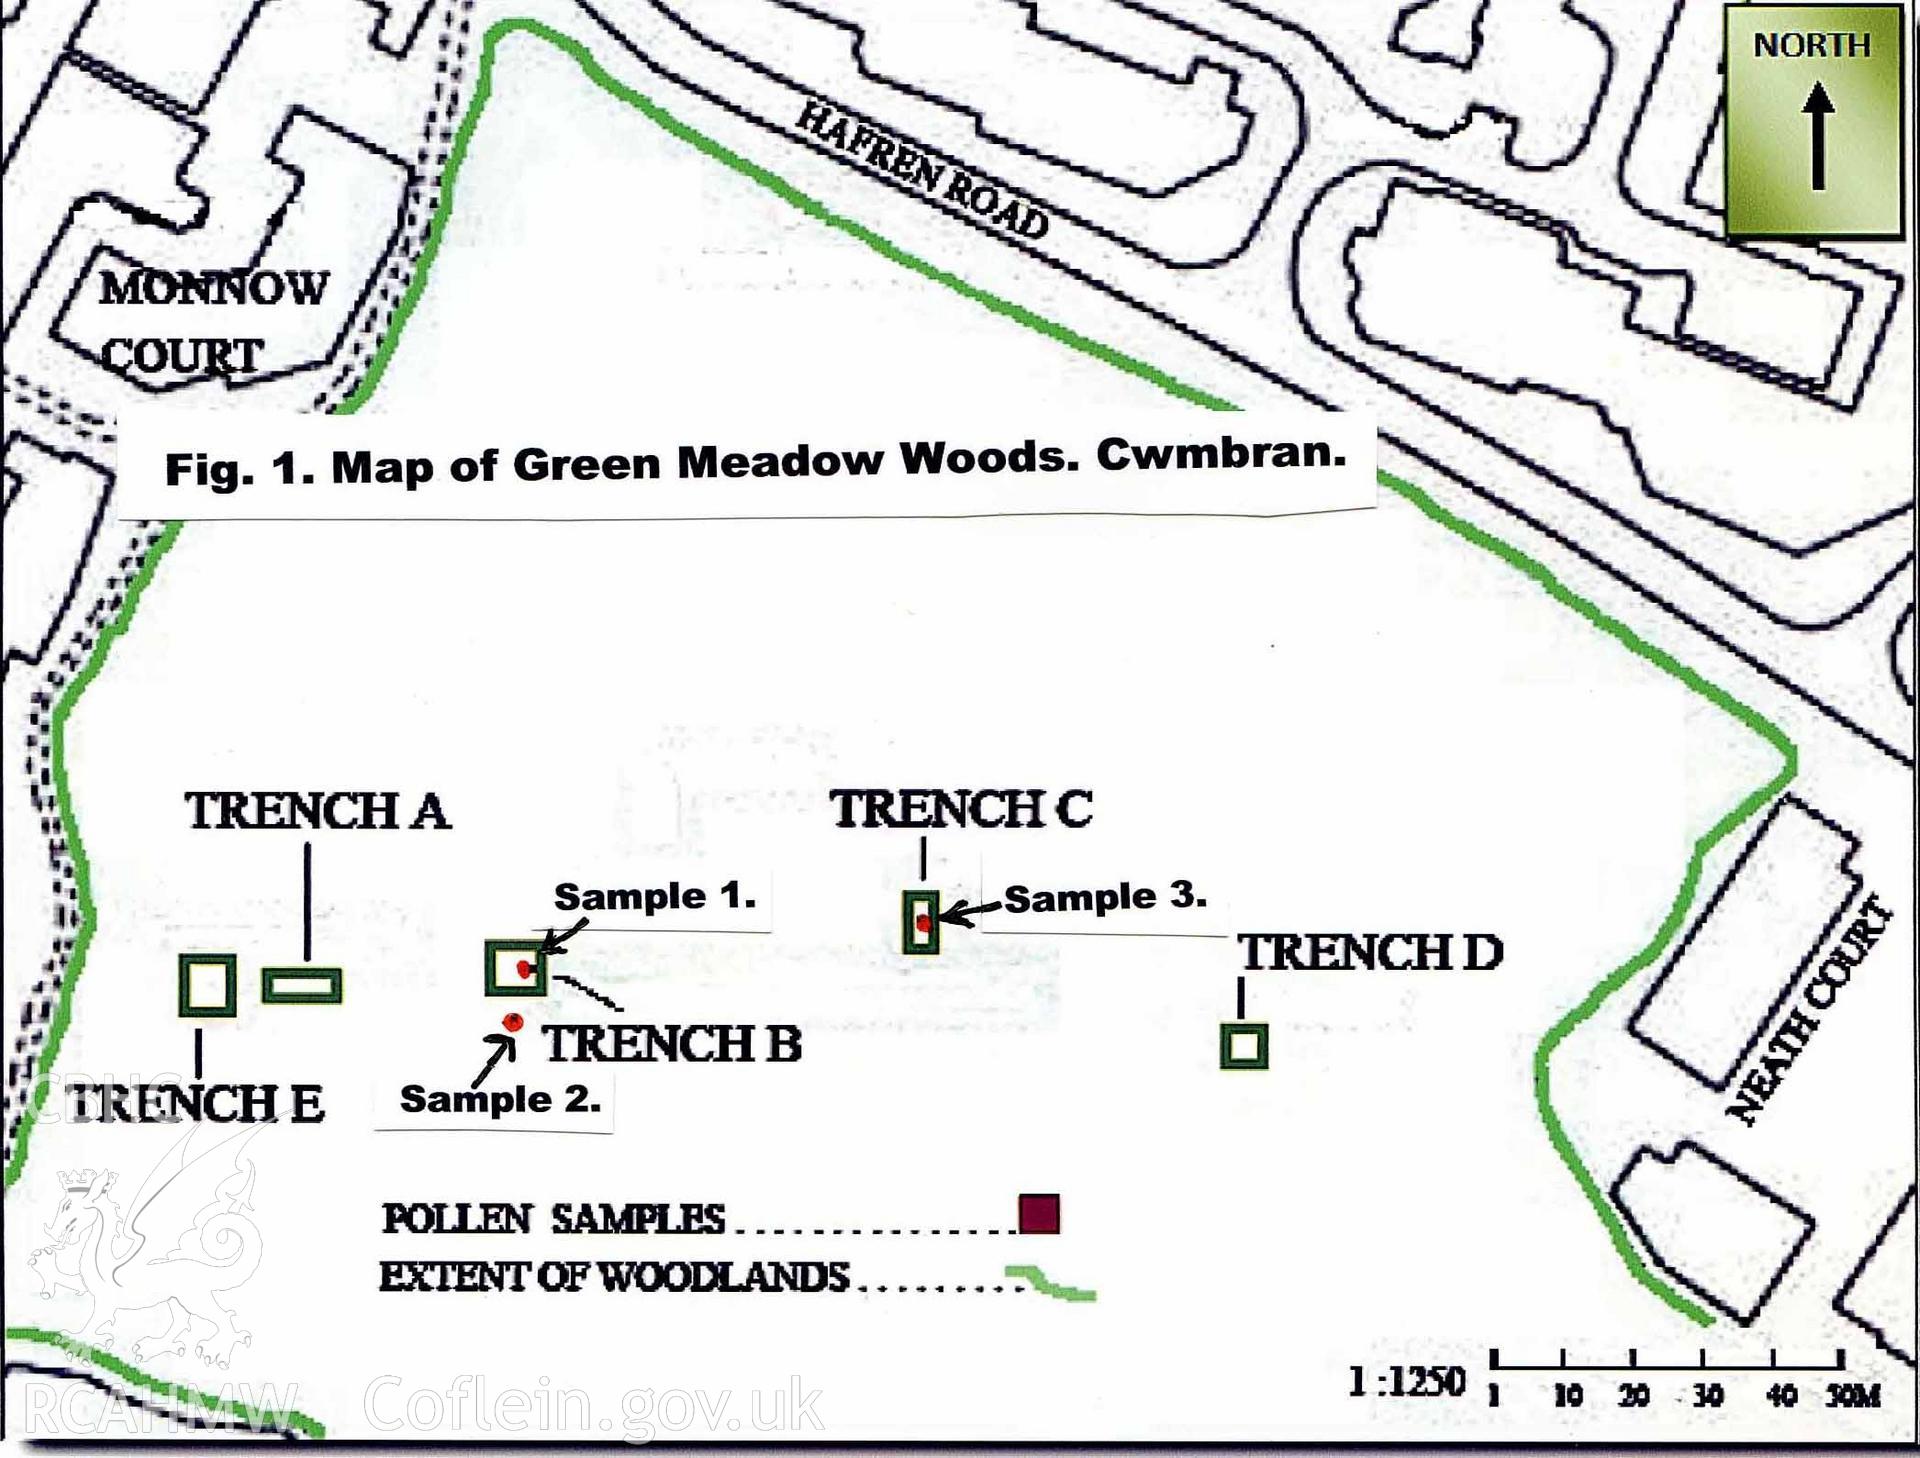 Digital site plan relating to a report entitled 'Microscopic examination of samples taken from the ?Holy Well? in Green Meadow Woods. Cwmbran. September 2011'.